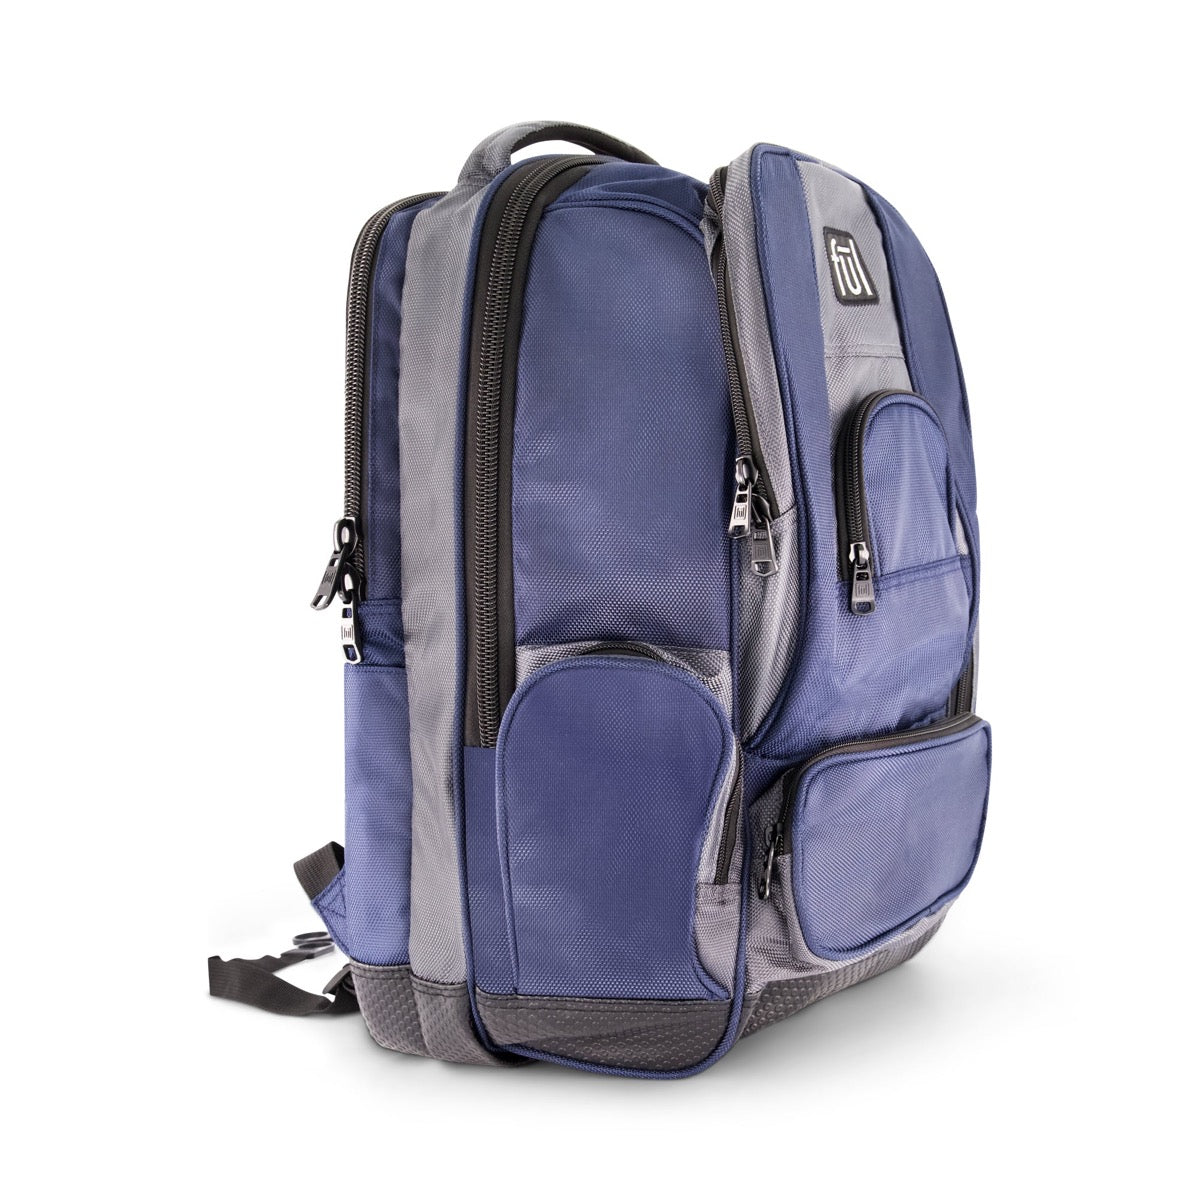 Big Easy Water Resistant 17" FŪL Laptop Carry-On Backpack Navy Grey